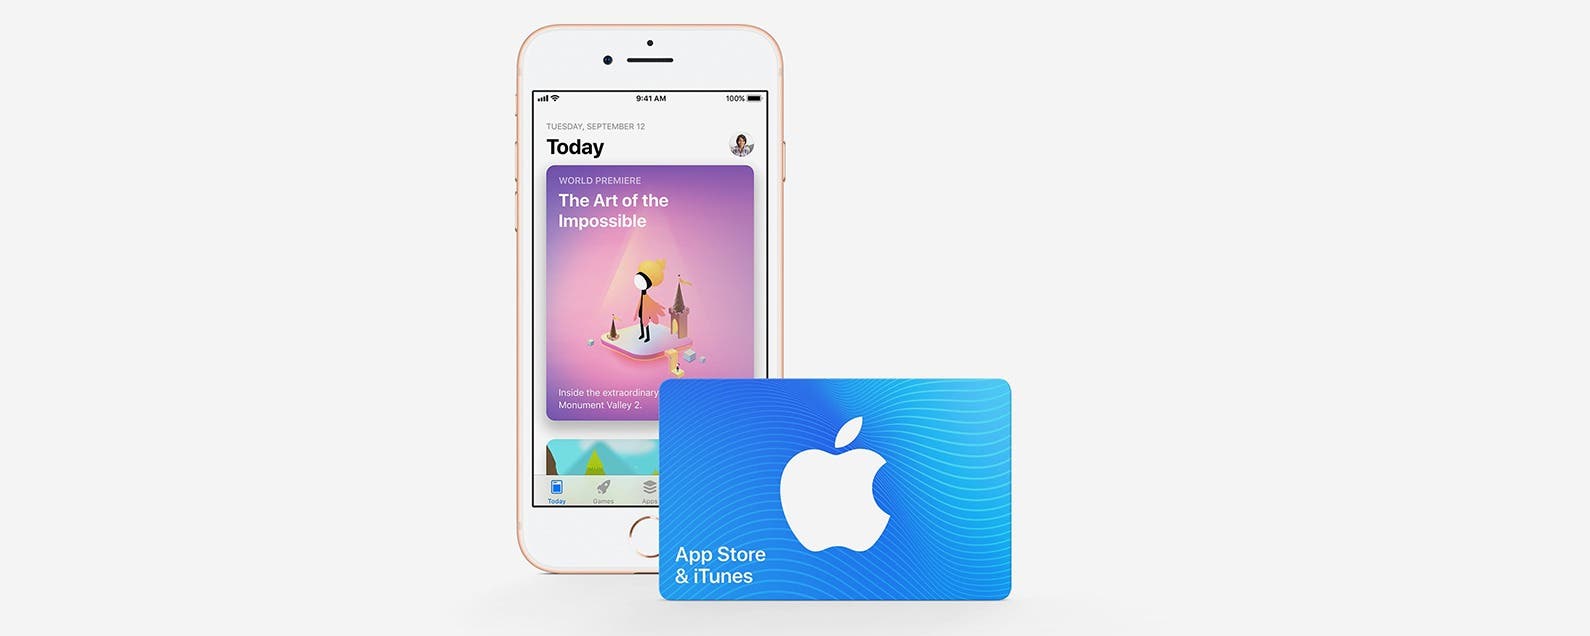 How To Redeem An Itunes Card To A Child Or Family Sharing Account - how to get robux with itunes gift card